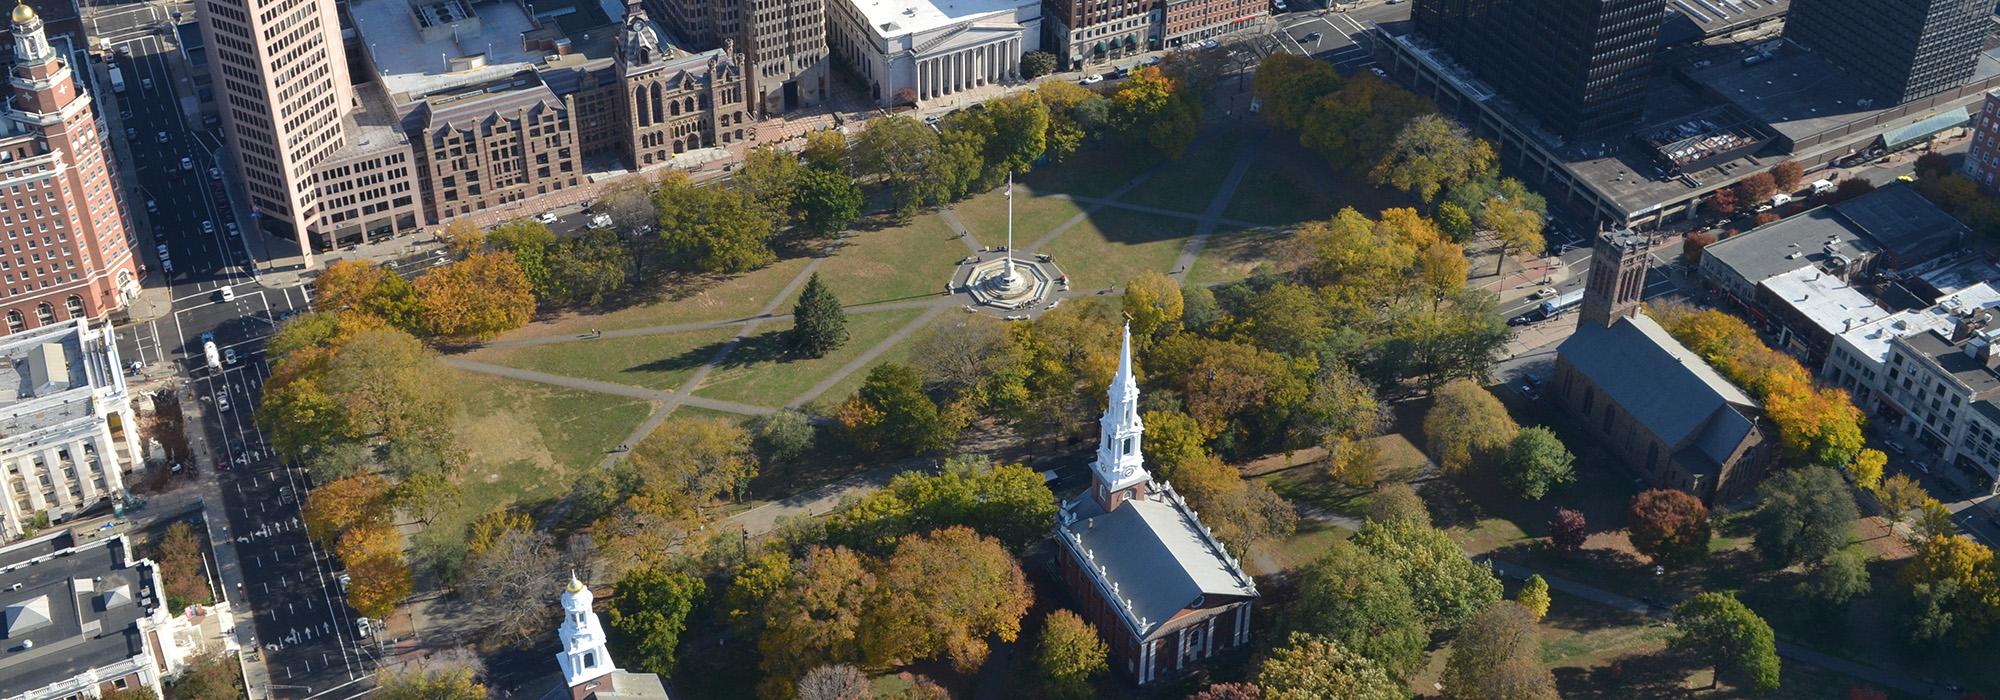 New Haven Green (U.S. National Park Service)